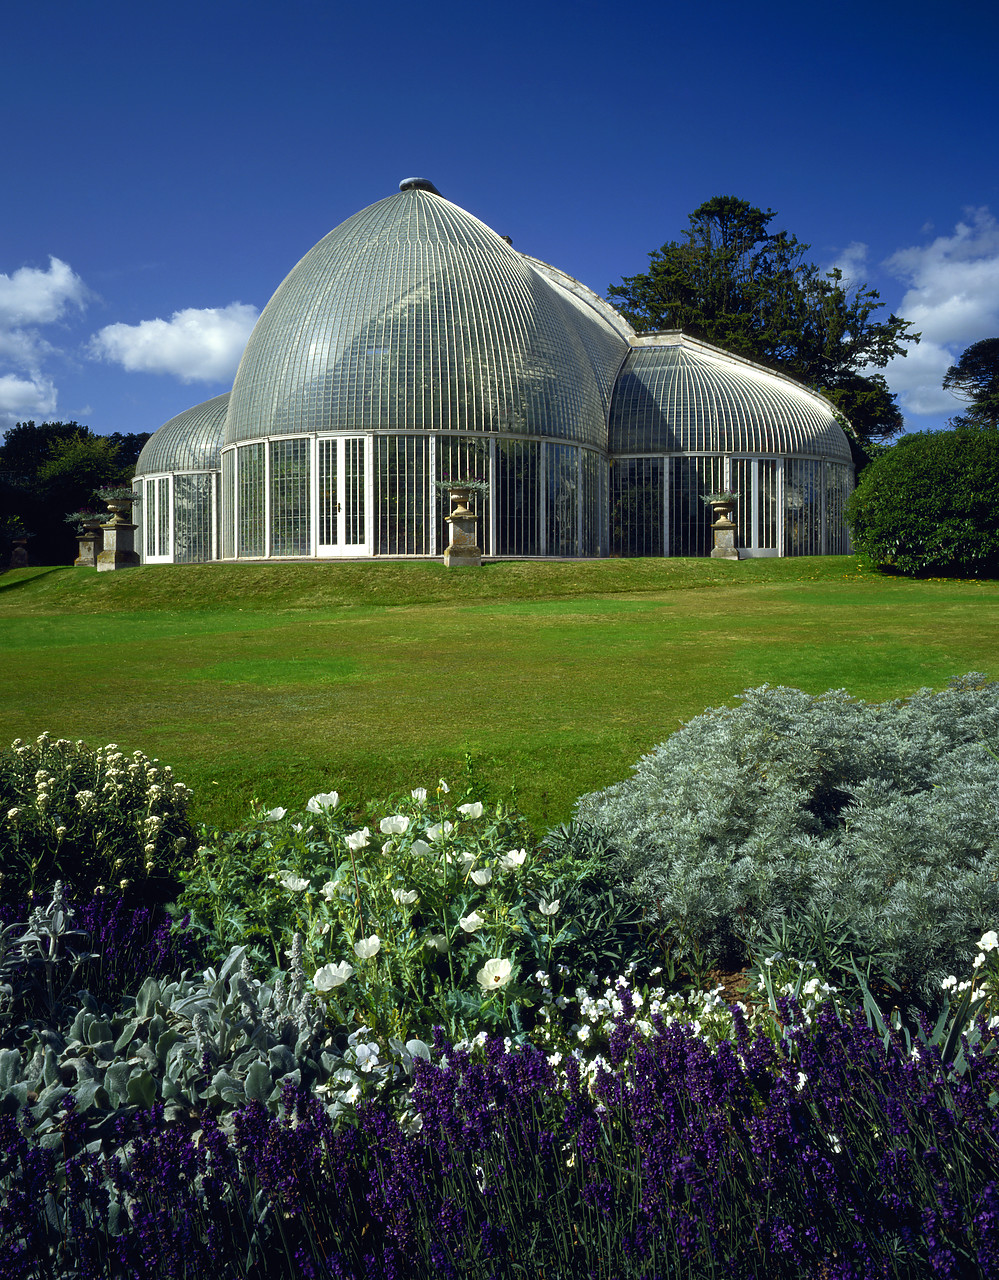 #924073-4 - The Palm House at Bicton Park, Gardens, East, Devon, England